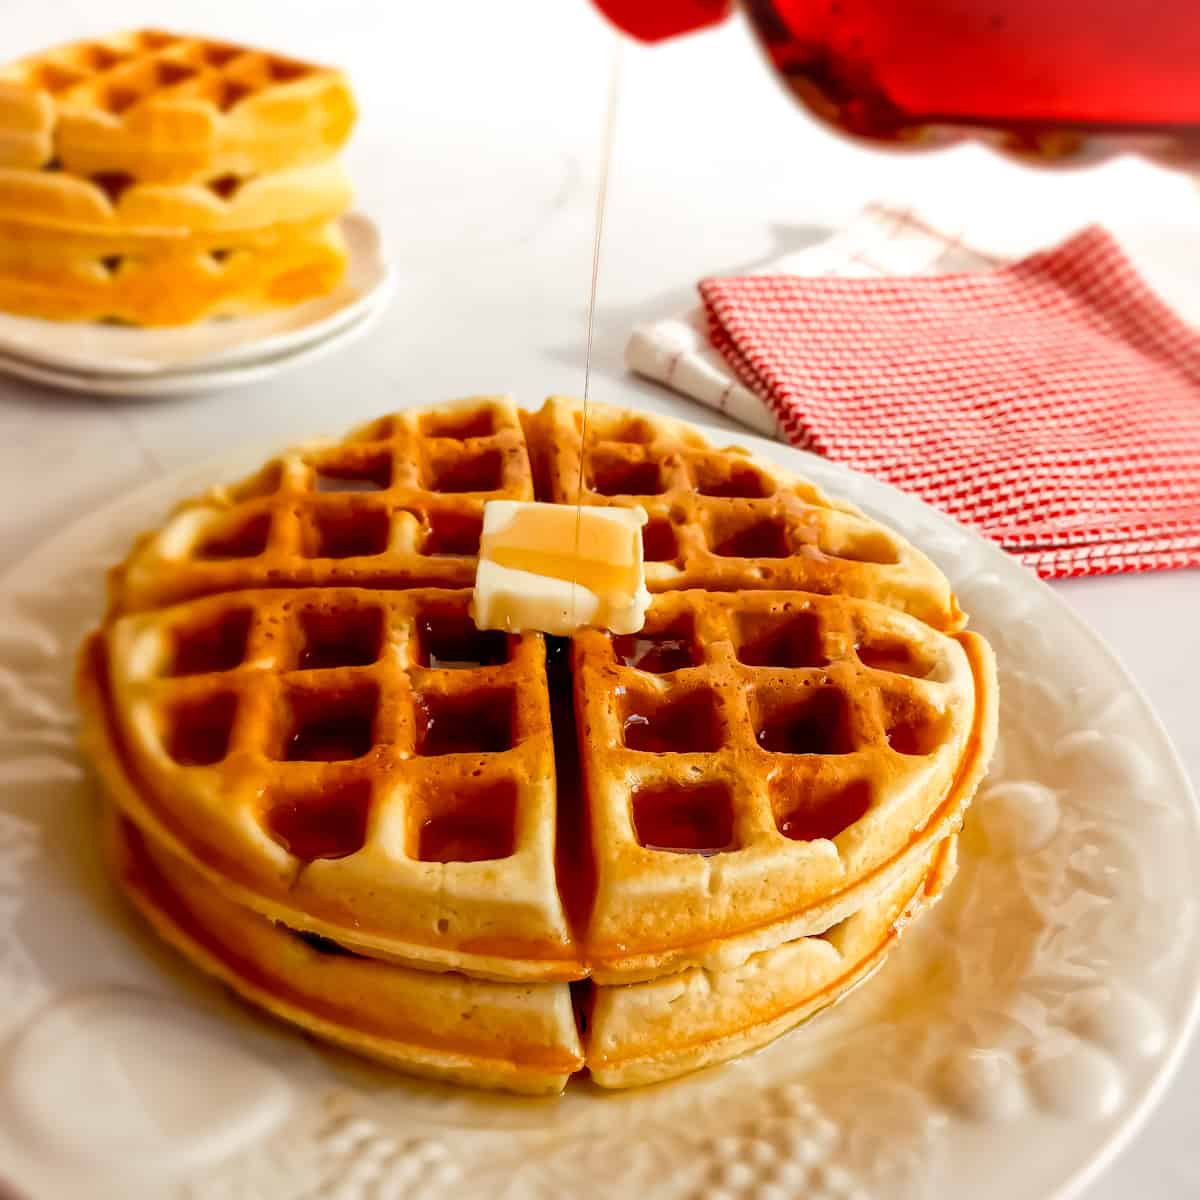 a double stack of Amish waffles on a plate with a pat of butter on top and drizzling syrup over them.